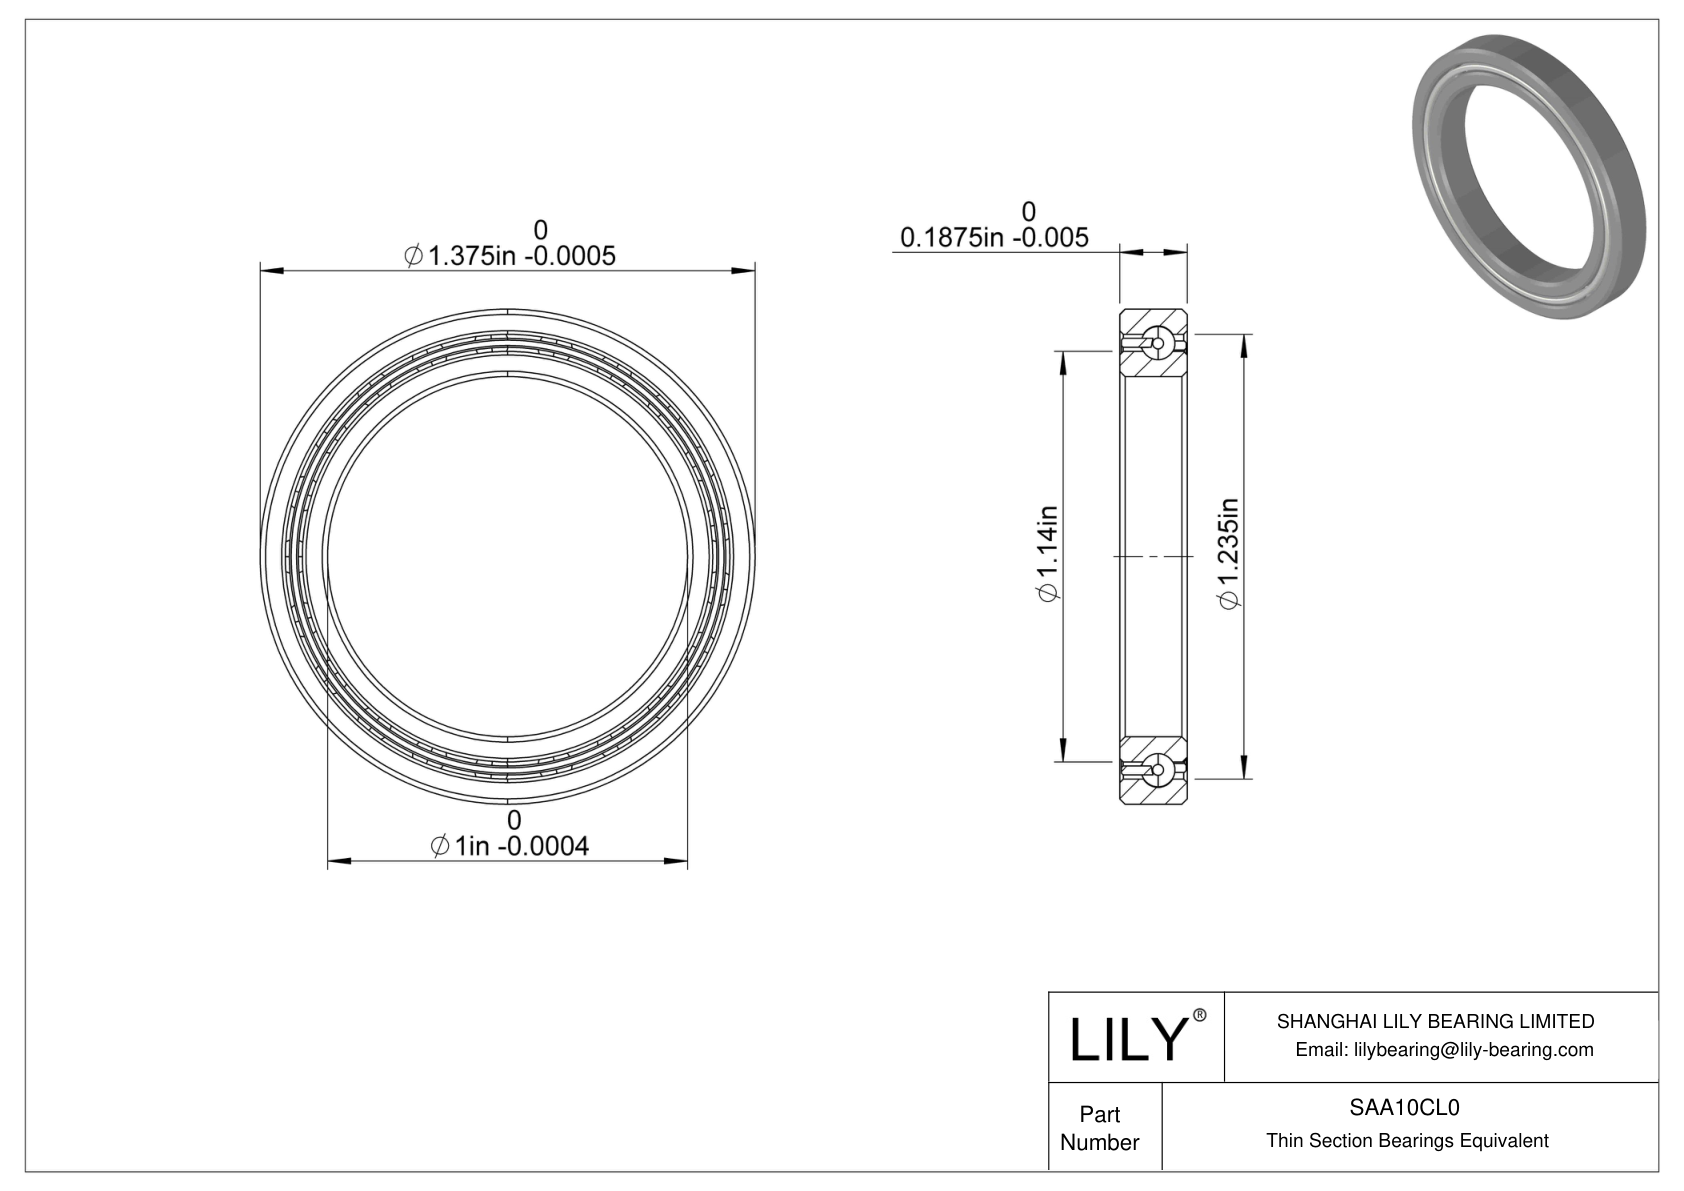 SAA10CL0 Constant Section (CS) Bearings CAD图形